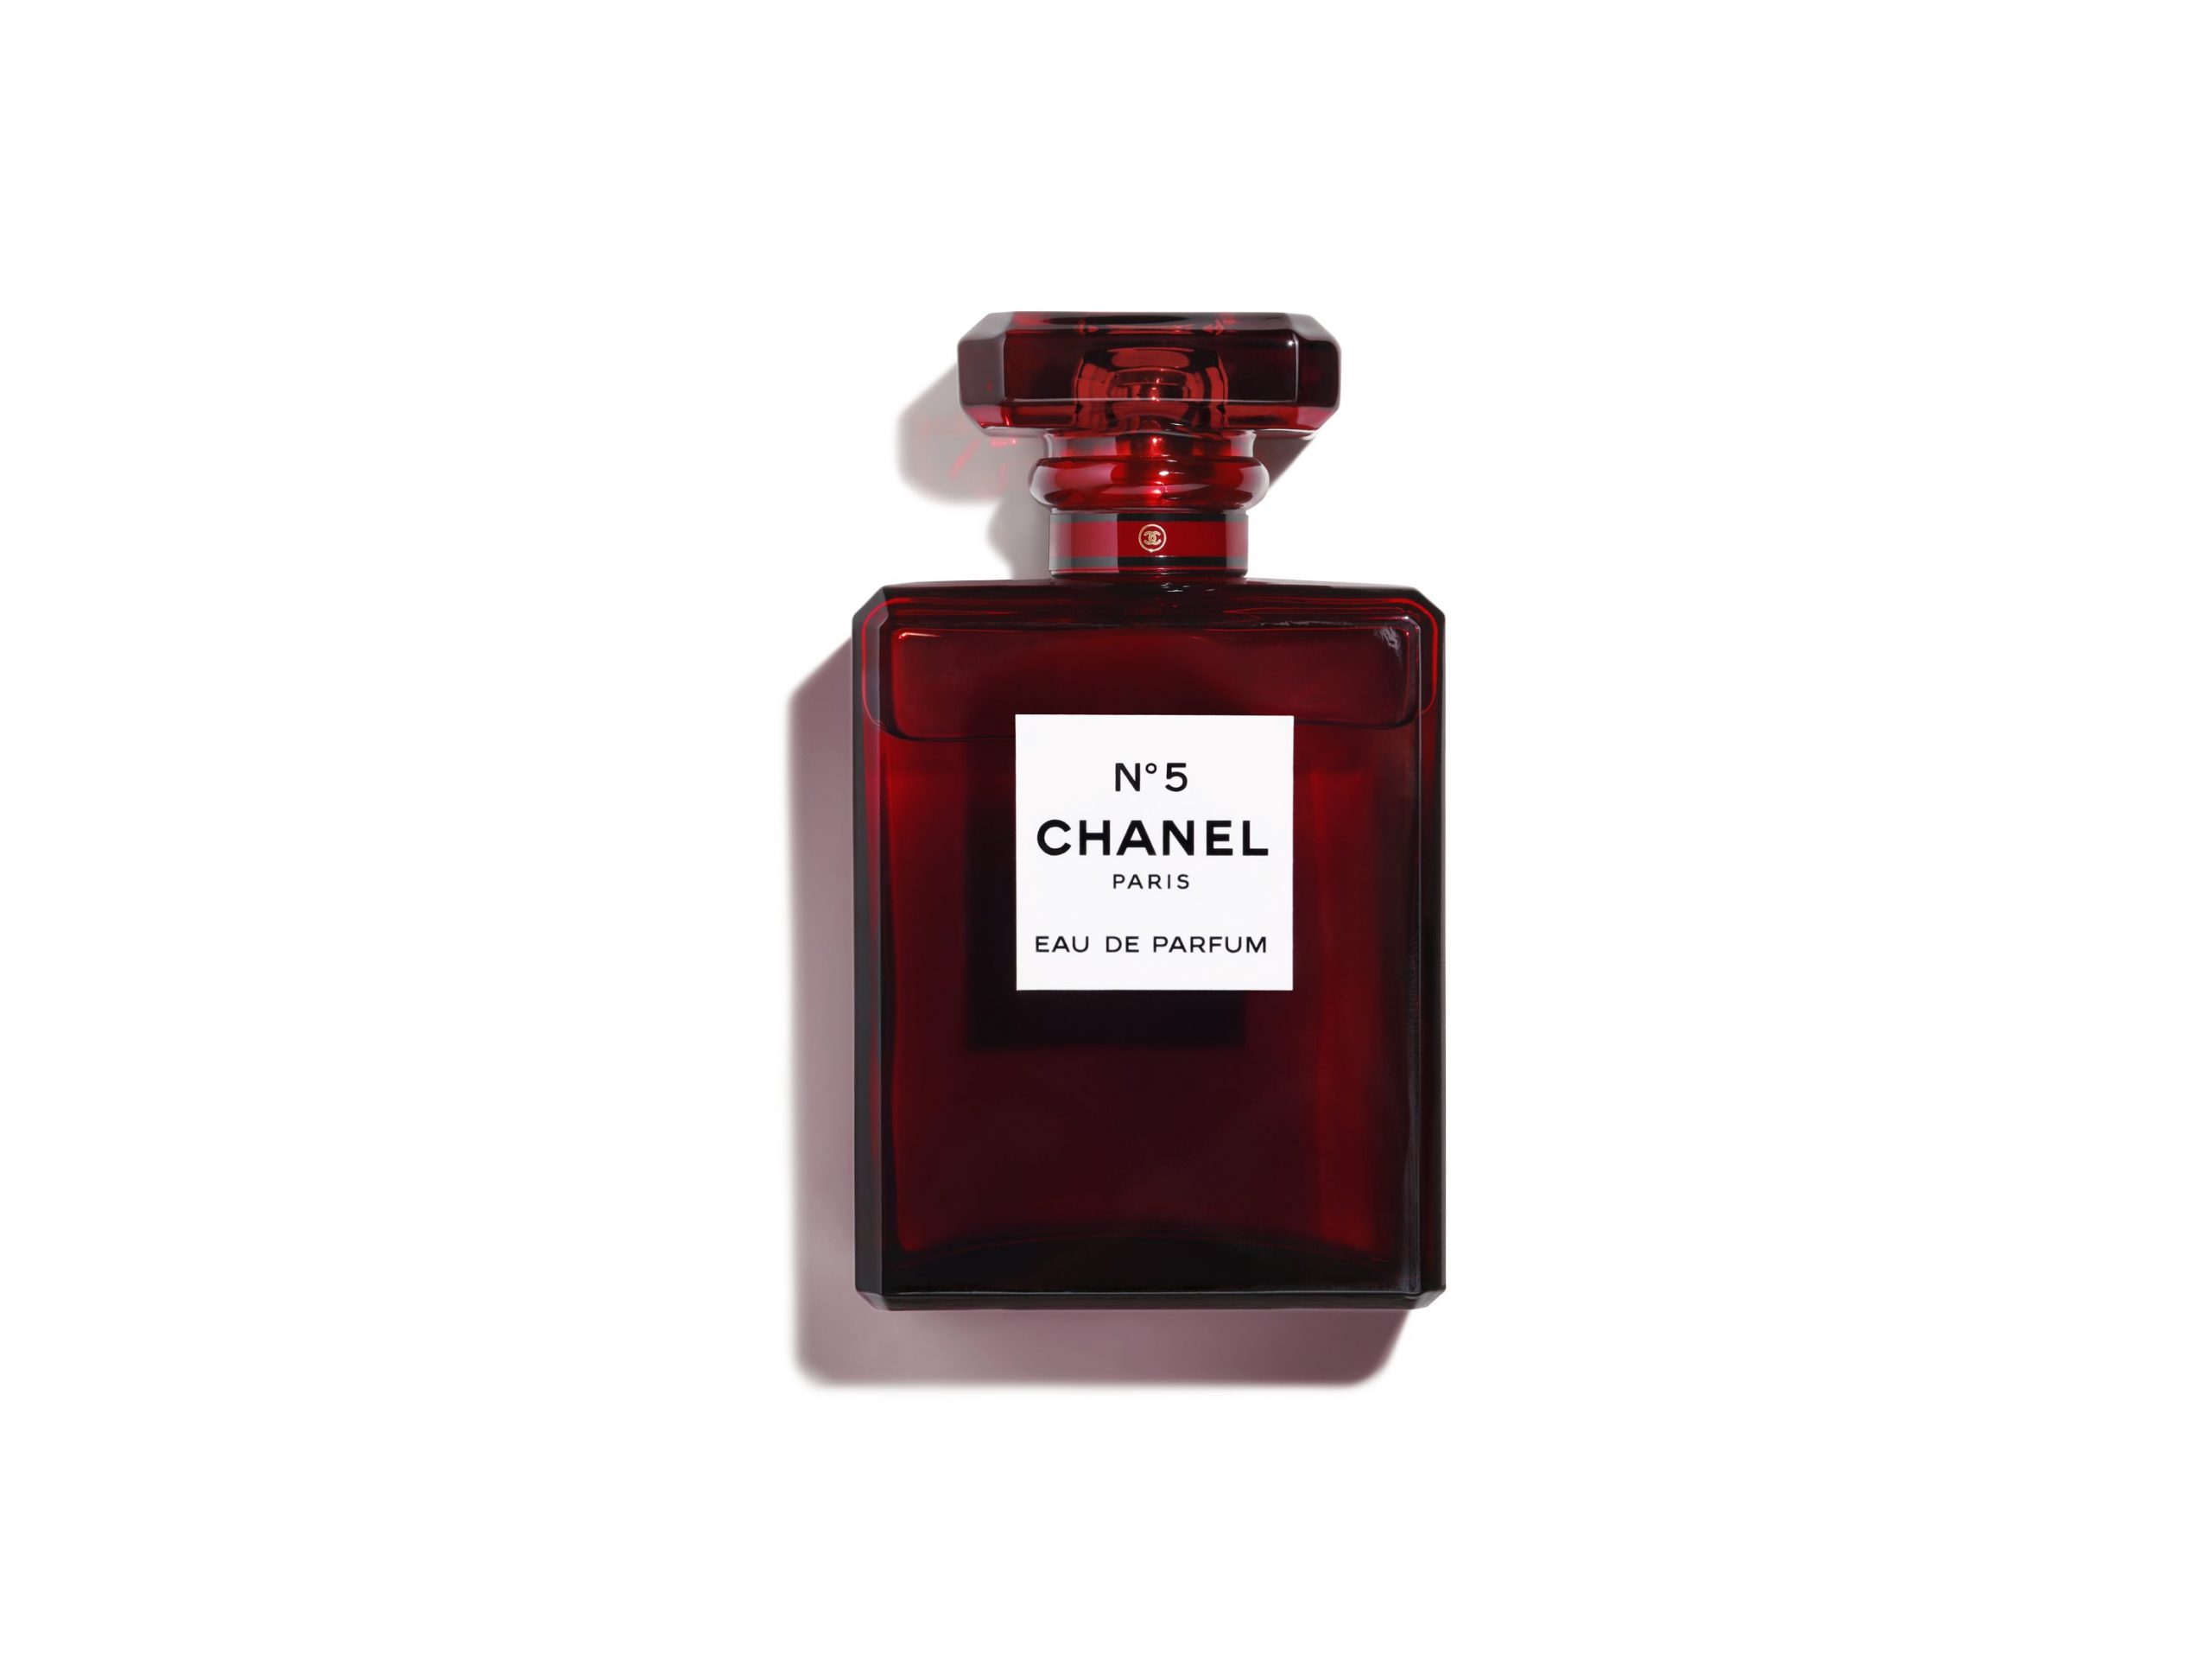 This limited edition Chanel No5 red just went straight to the top